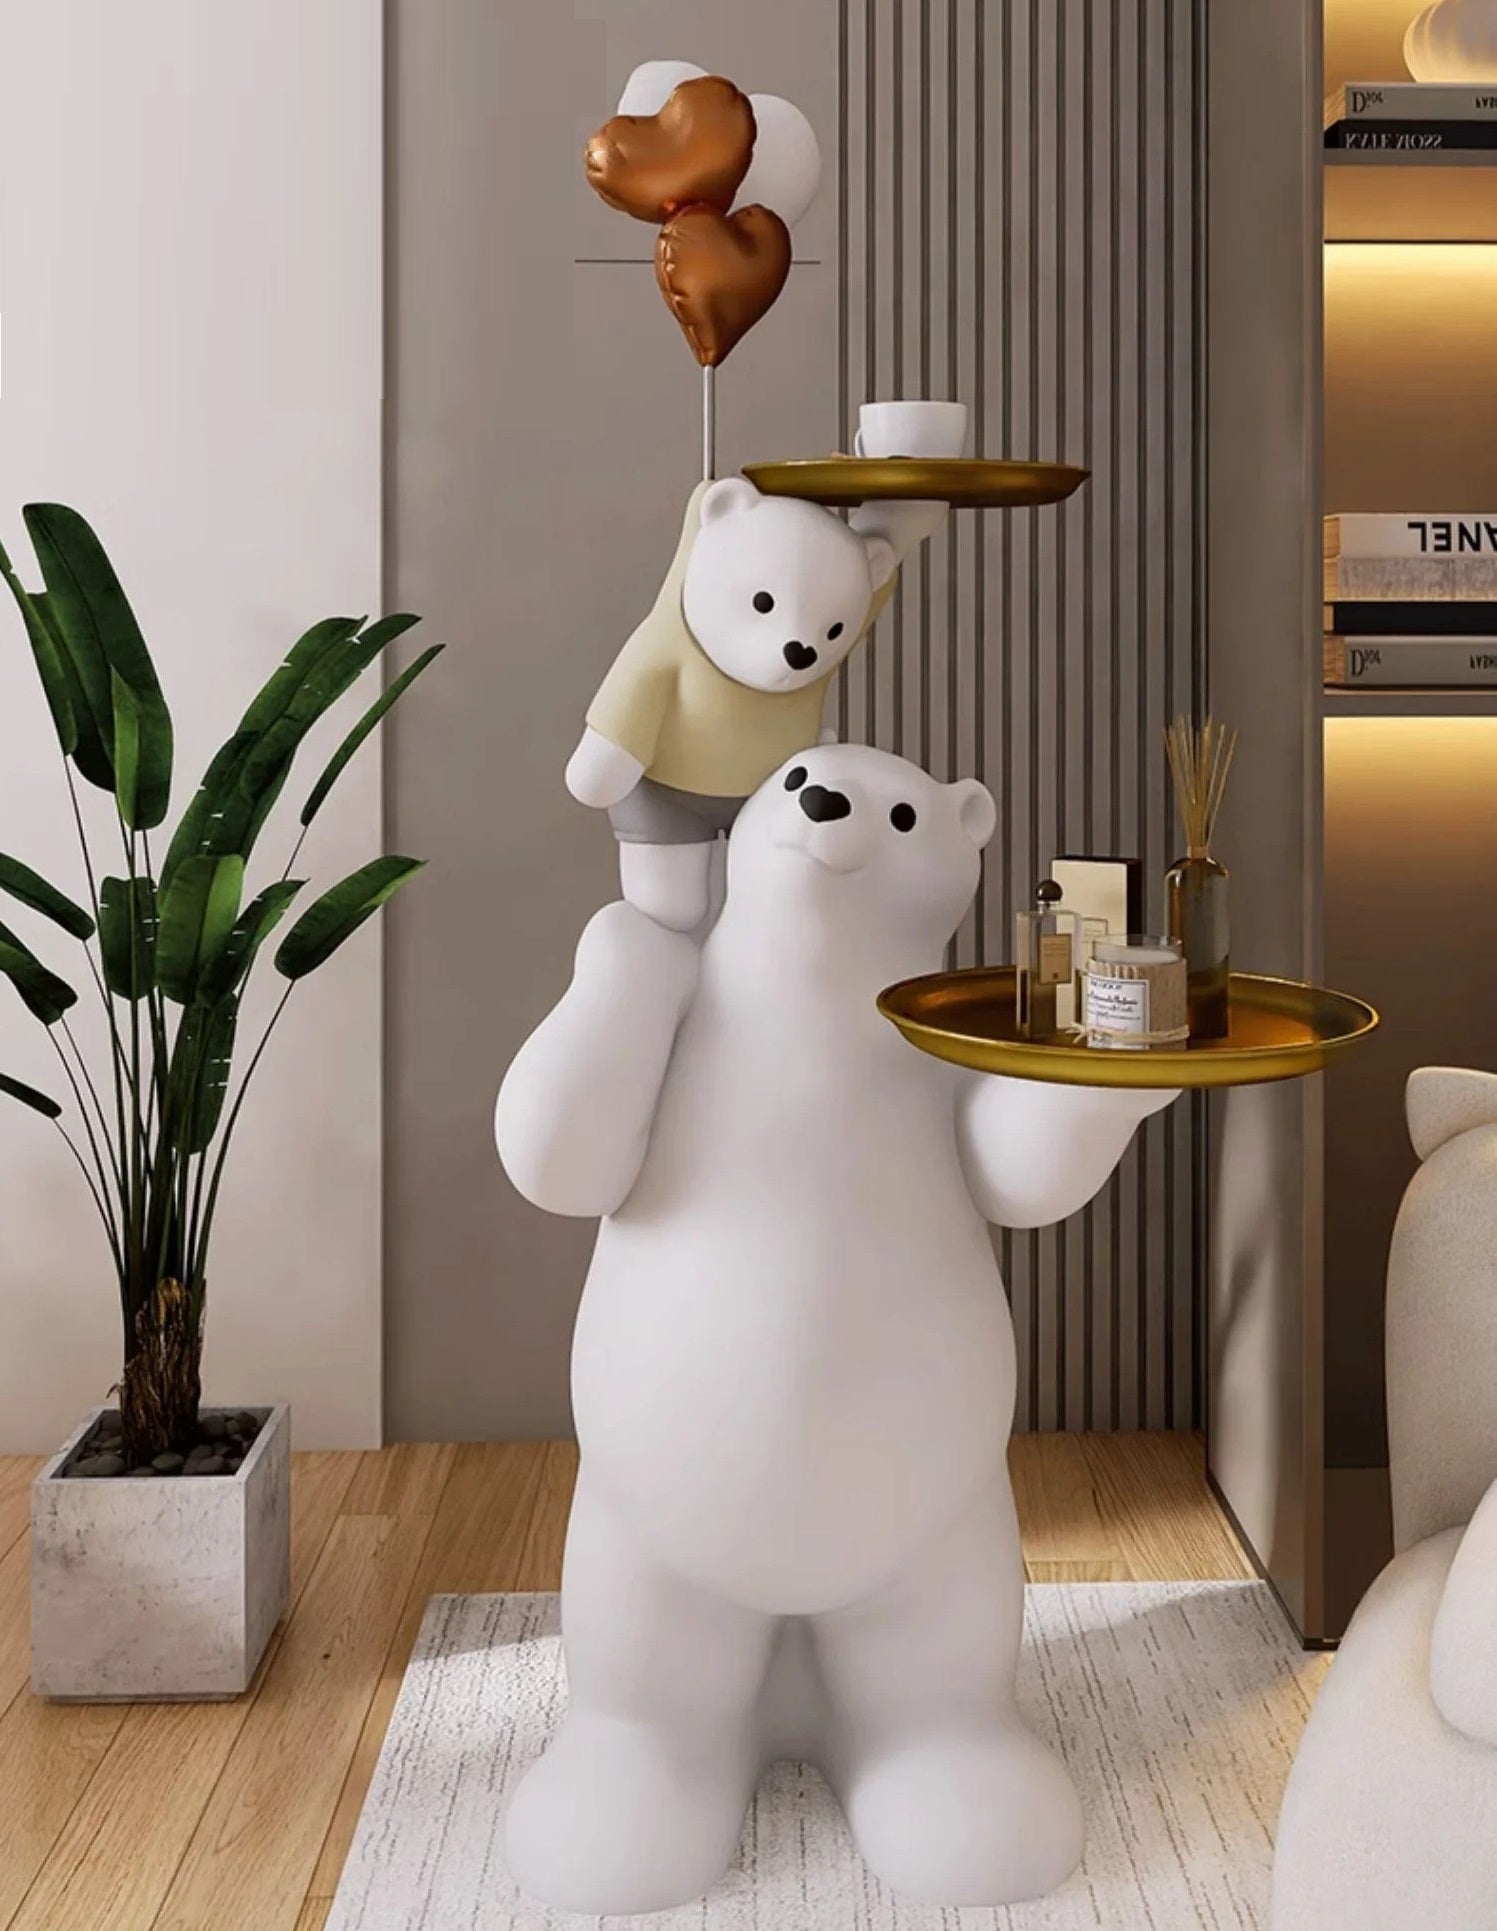 Decorative sculpture of two polar bears in a living room, the larger one holding a tray while the smaller bear atop its shoulders holds a heart-shaped balloon.